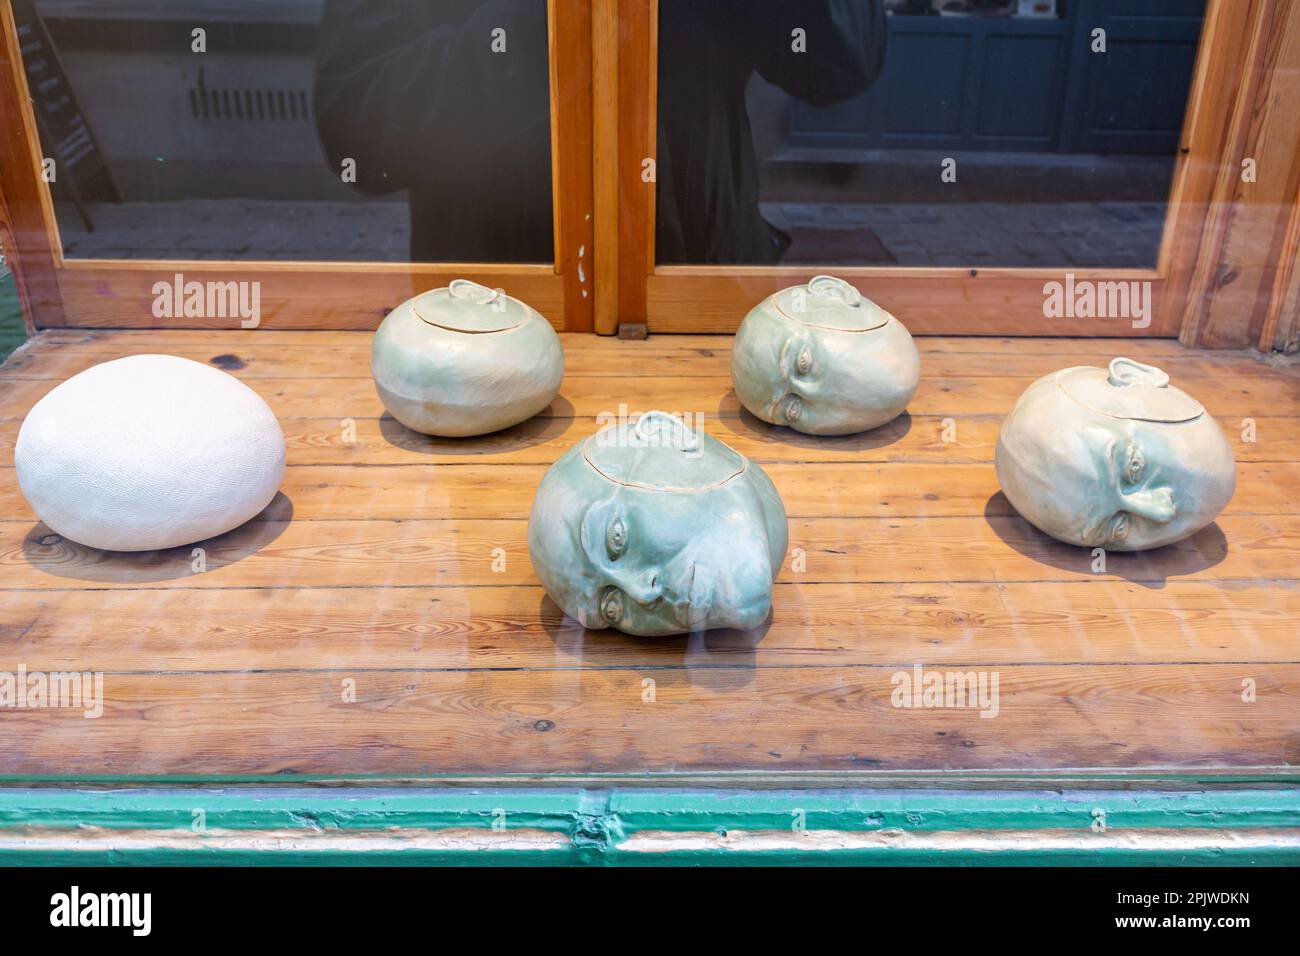 Boxes in the shape of human heads, displayed in the front of a store in Brussels. Stock Photo